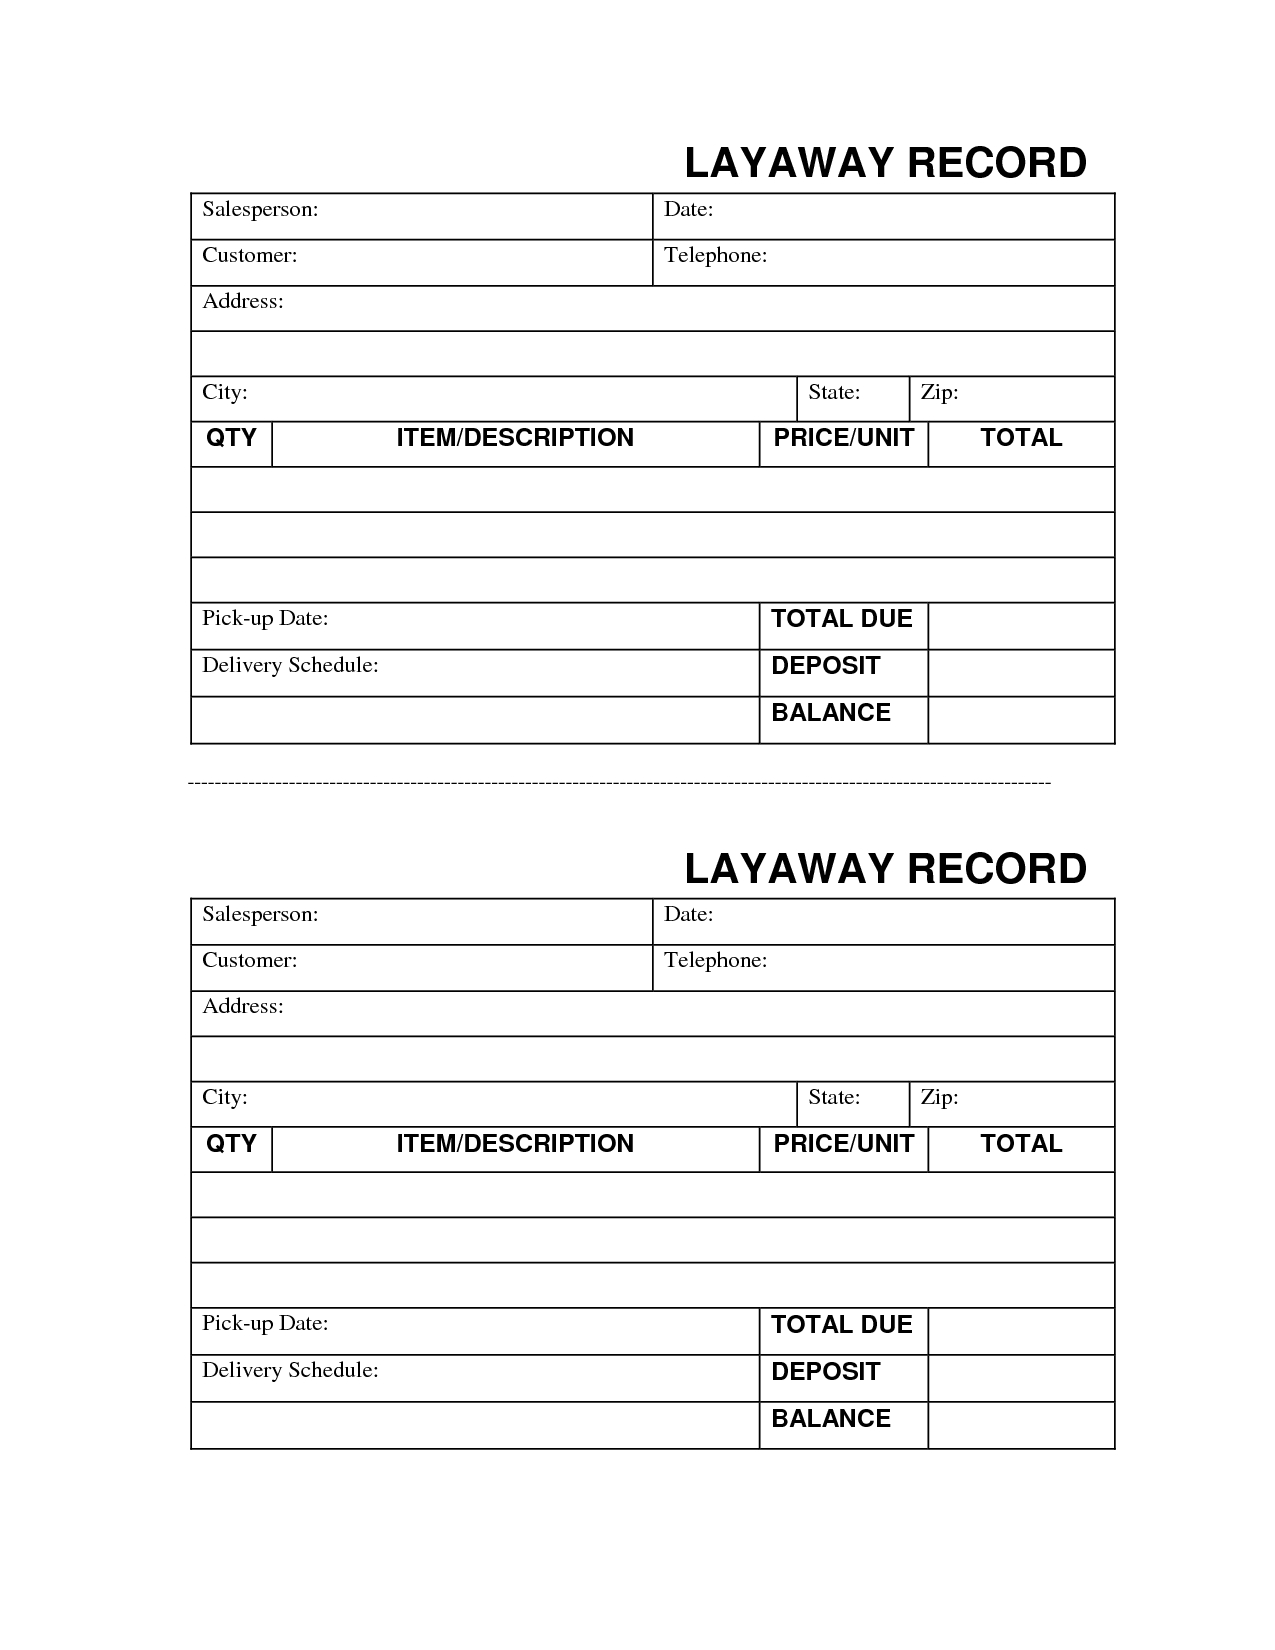 005 Free Printable Layaway Forms 108268 Plan ~ Tinypetition - Free Printable Layaway Forms